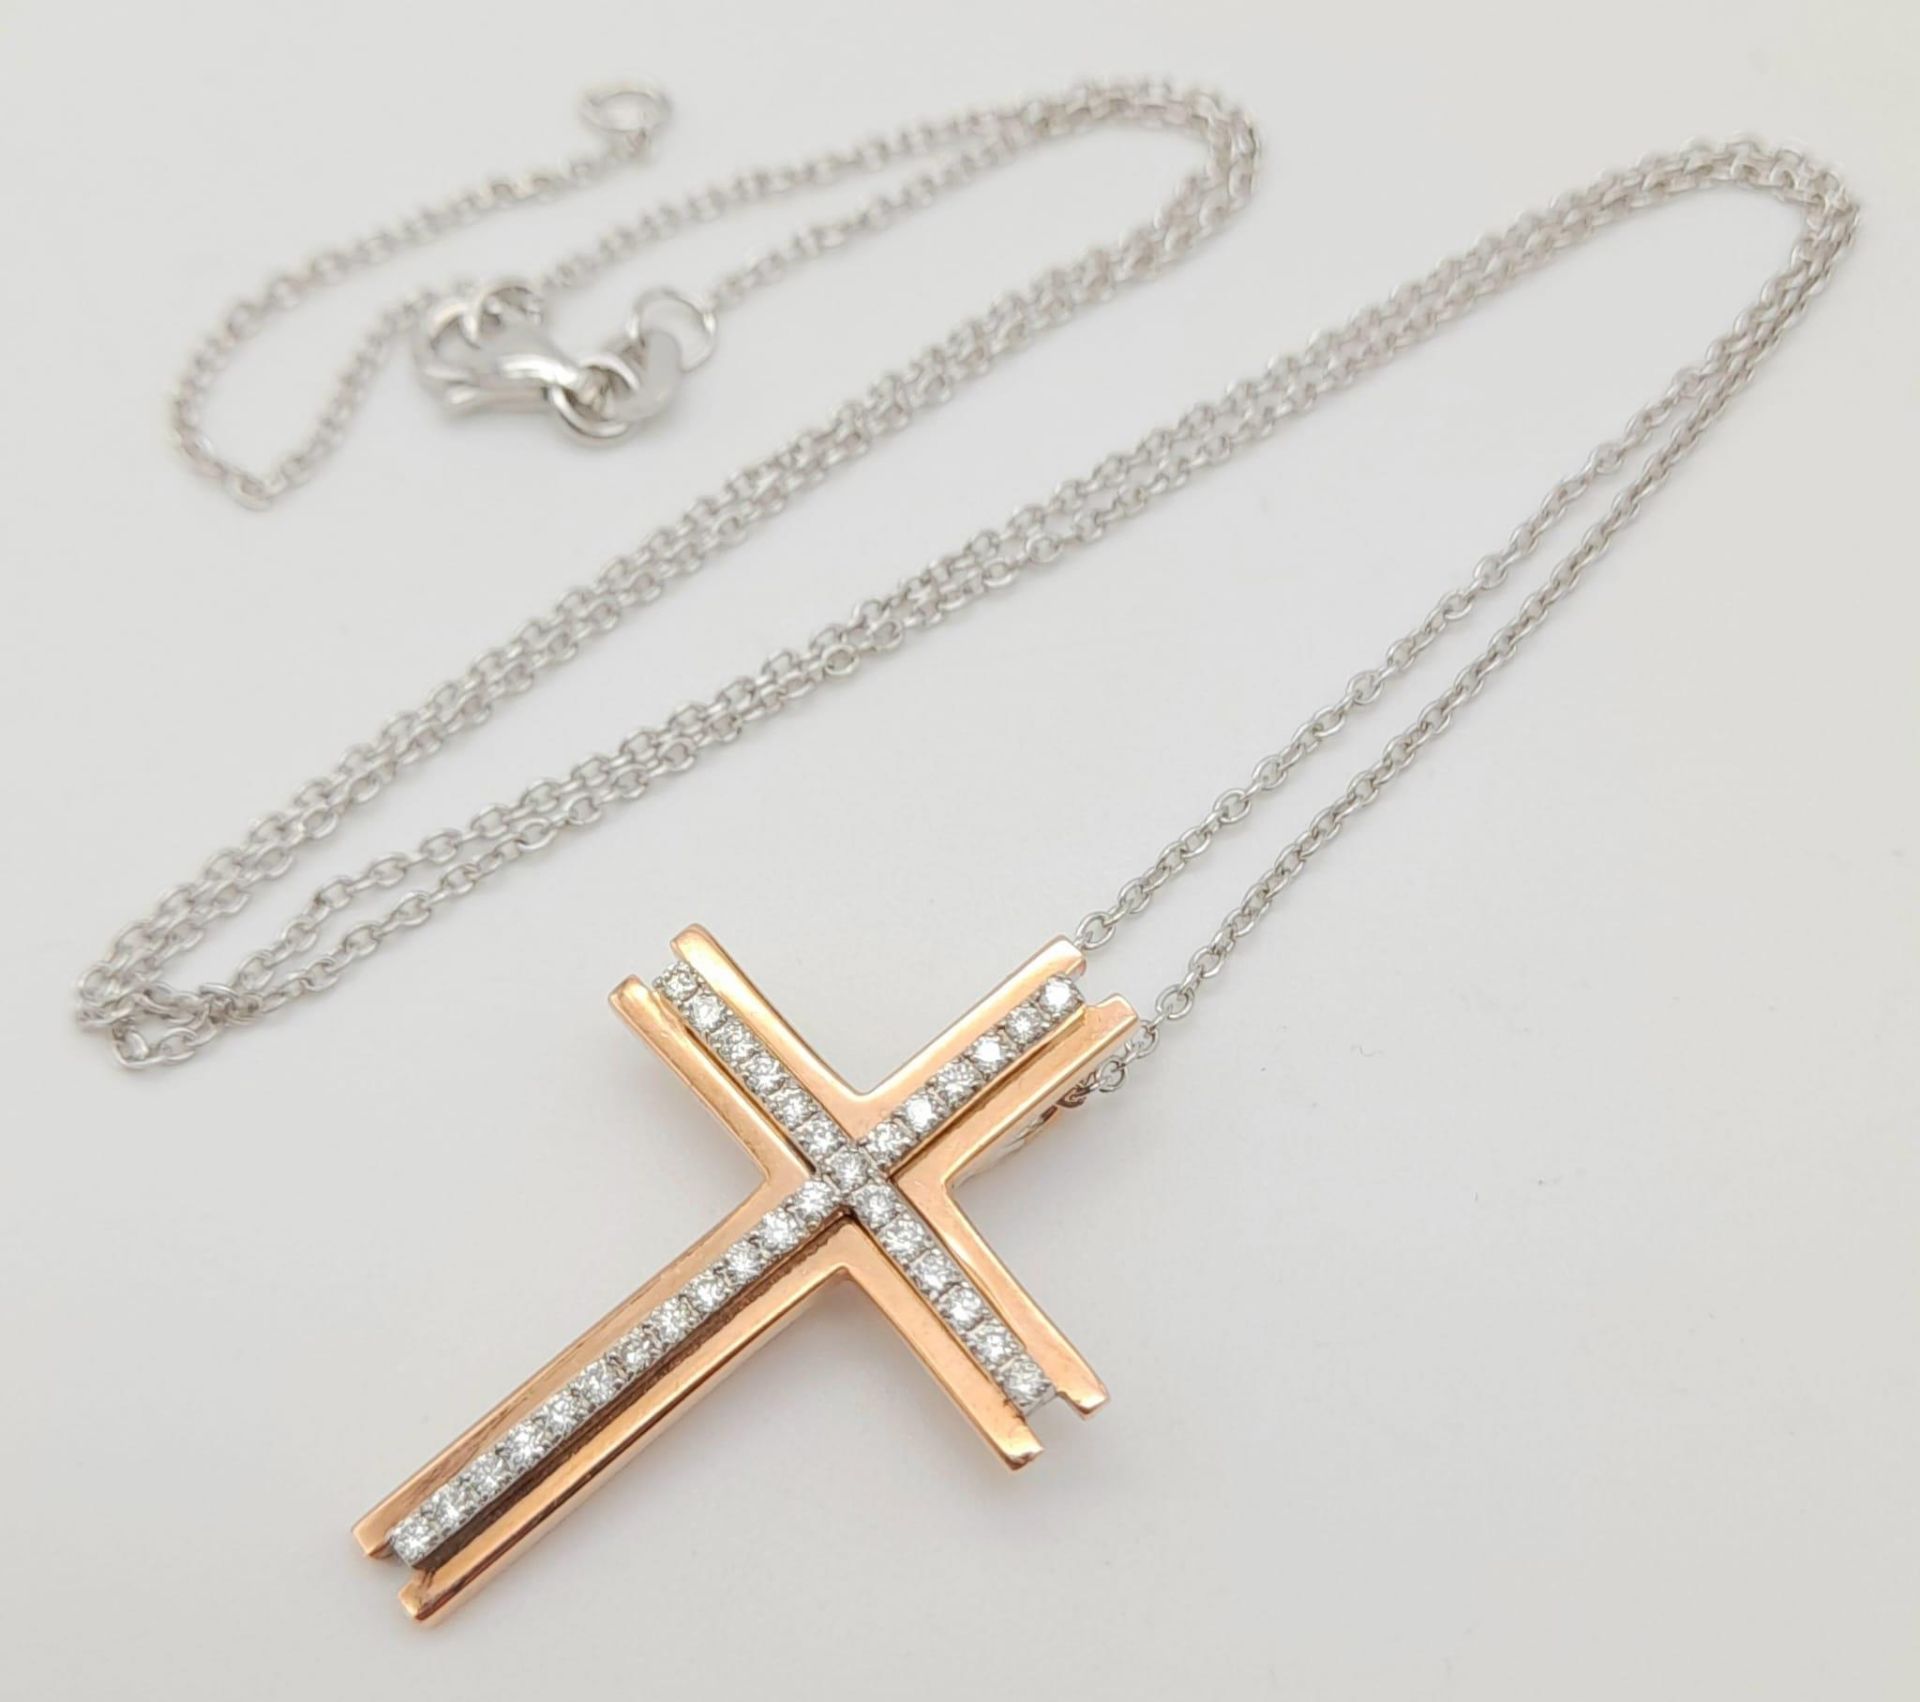 A 9K Rose Gold and Diamond Cross Pendant on a 9K White Gold Disappearing Necklace. Diamond encrusted